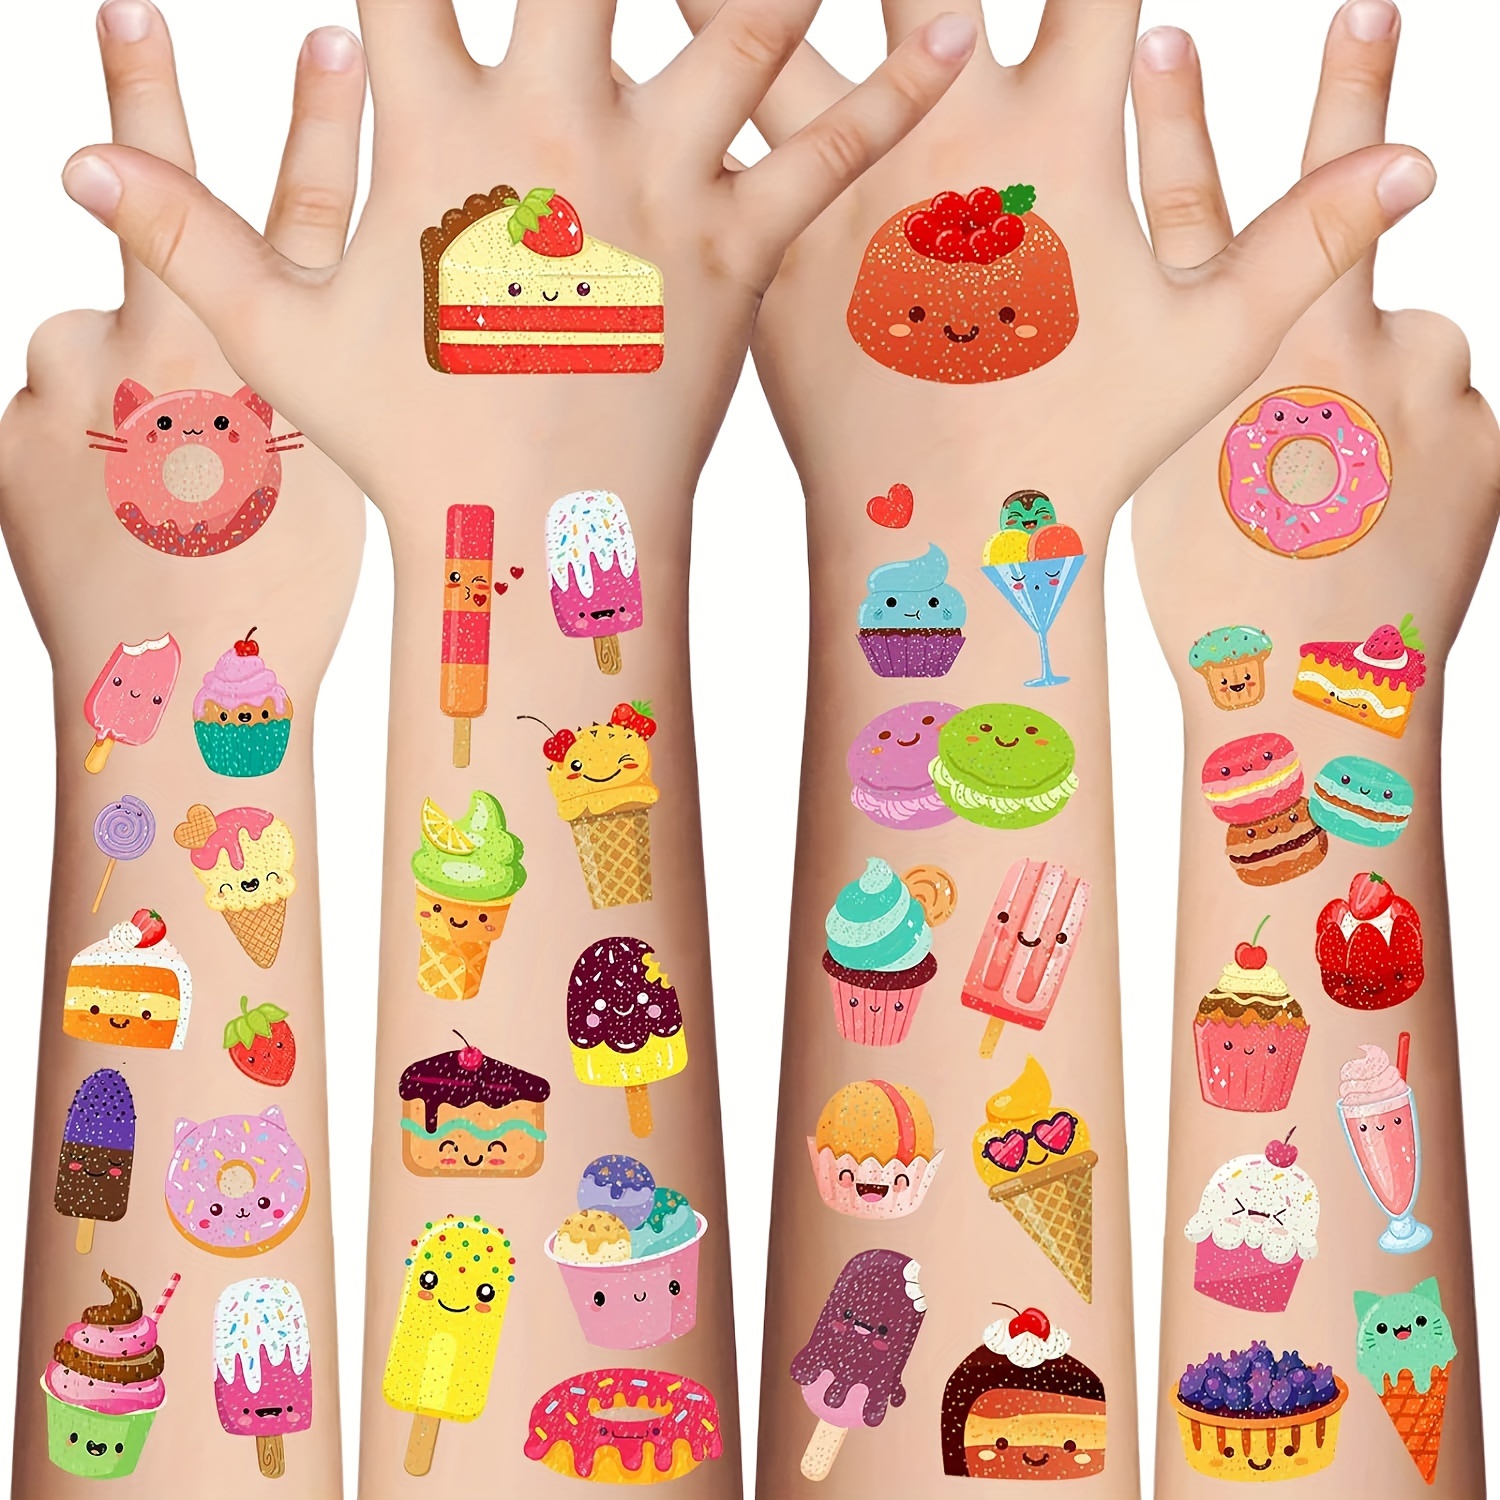 

146-piece Glitter Ice Cream & Cake Temporary Tattoos Set - Vibrant Face Makeup Stickers For Birthday & Holiday Parties, 10 Sheets